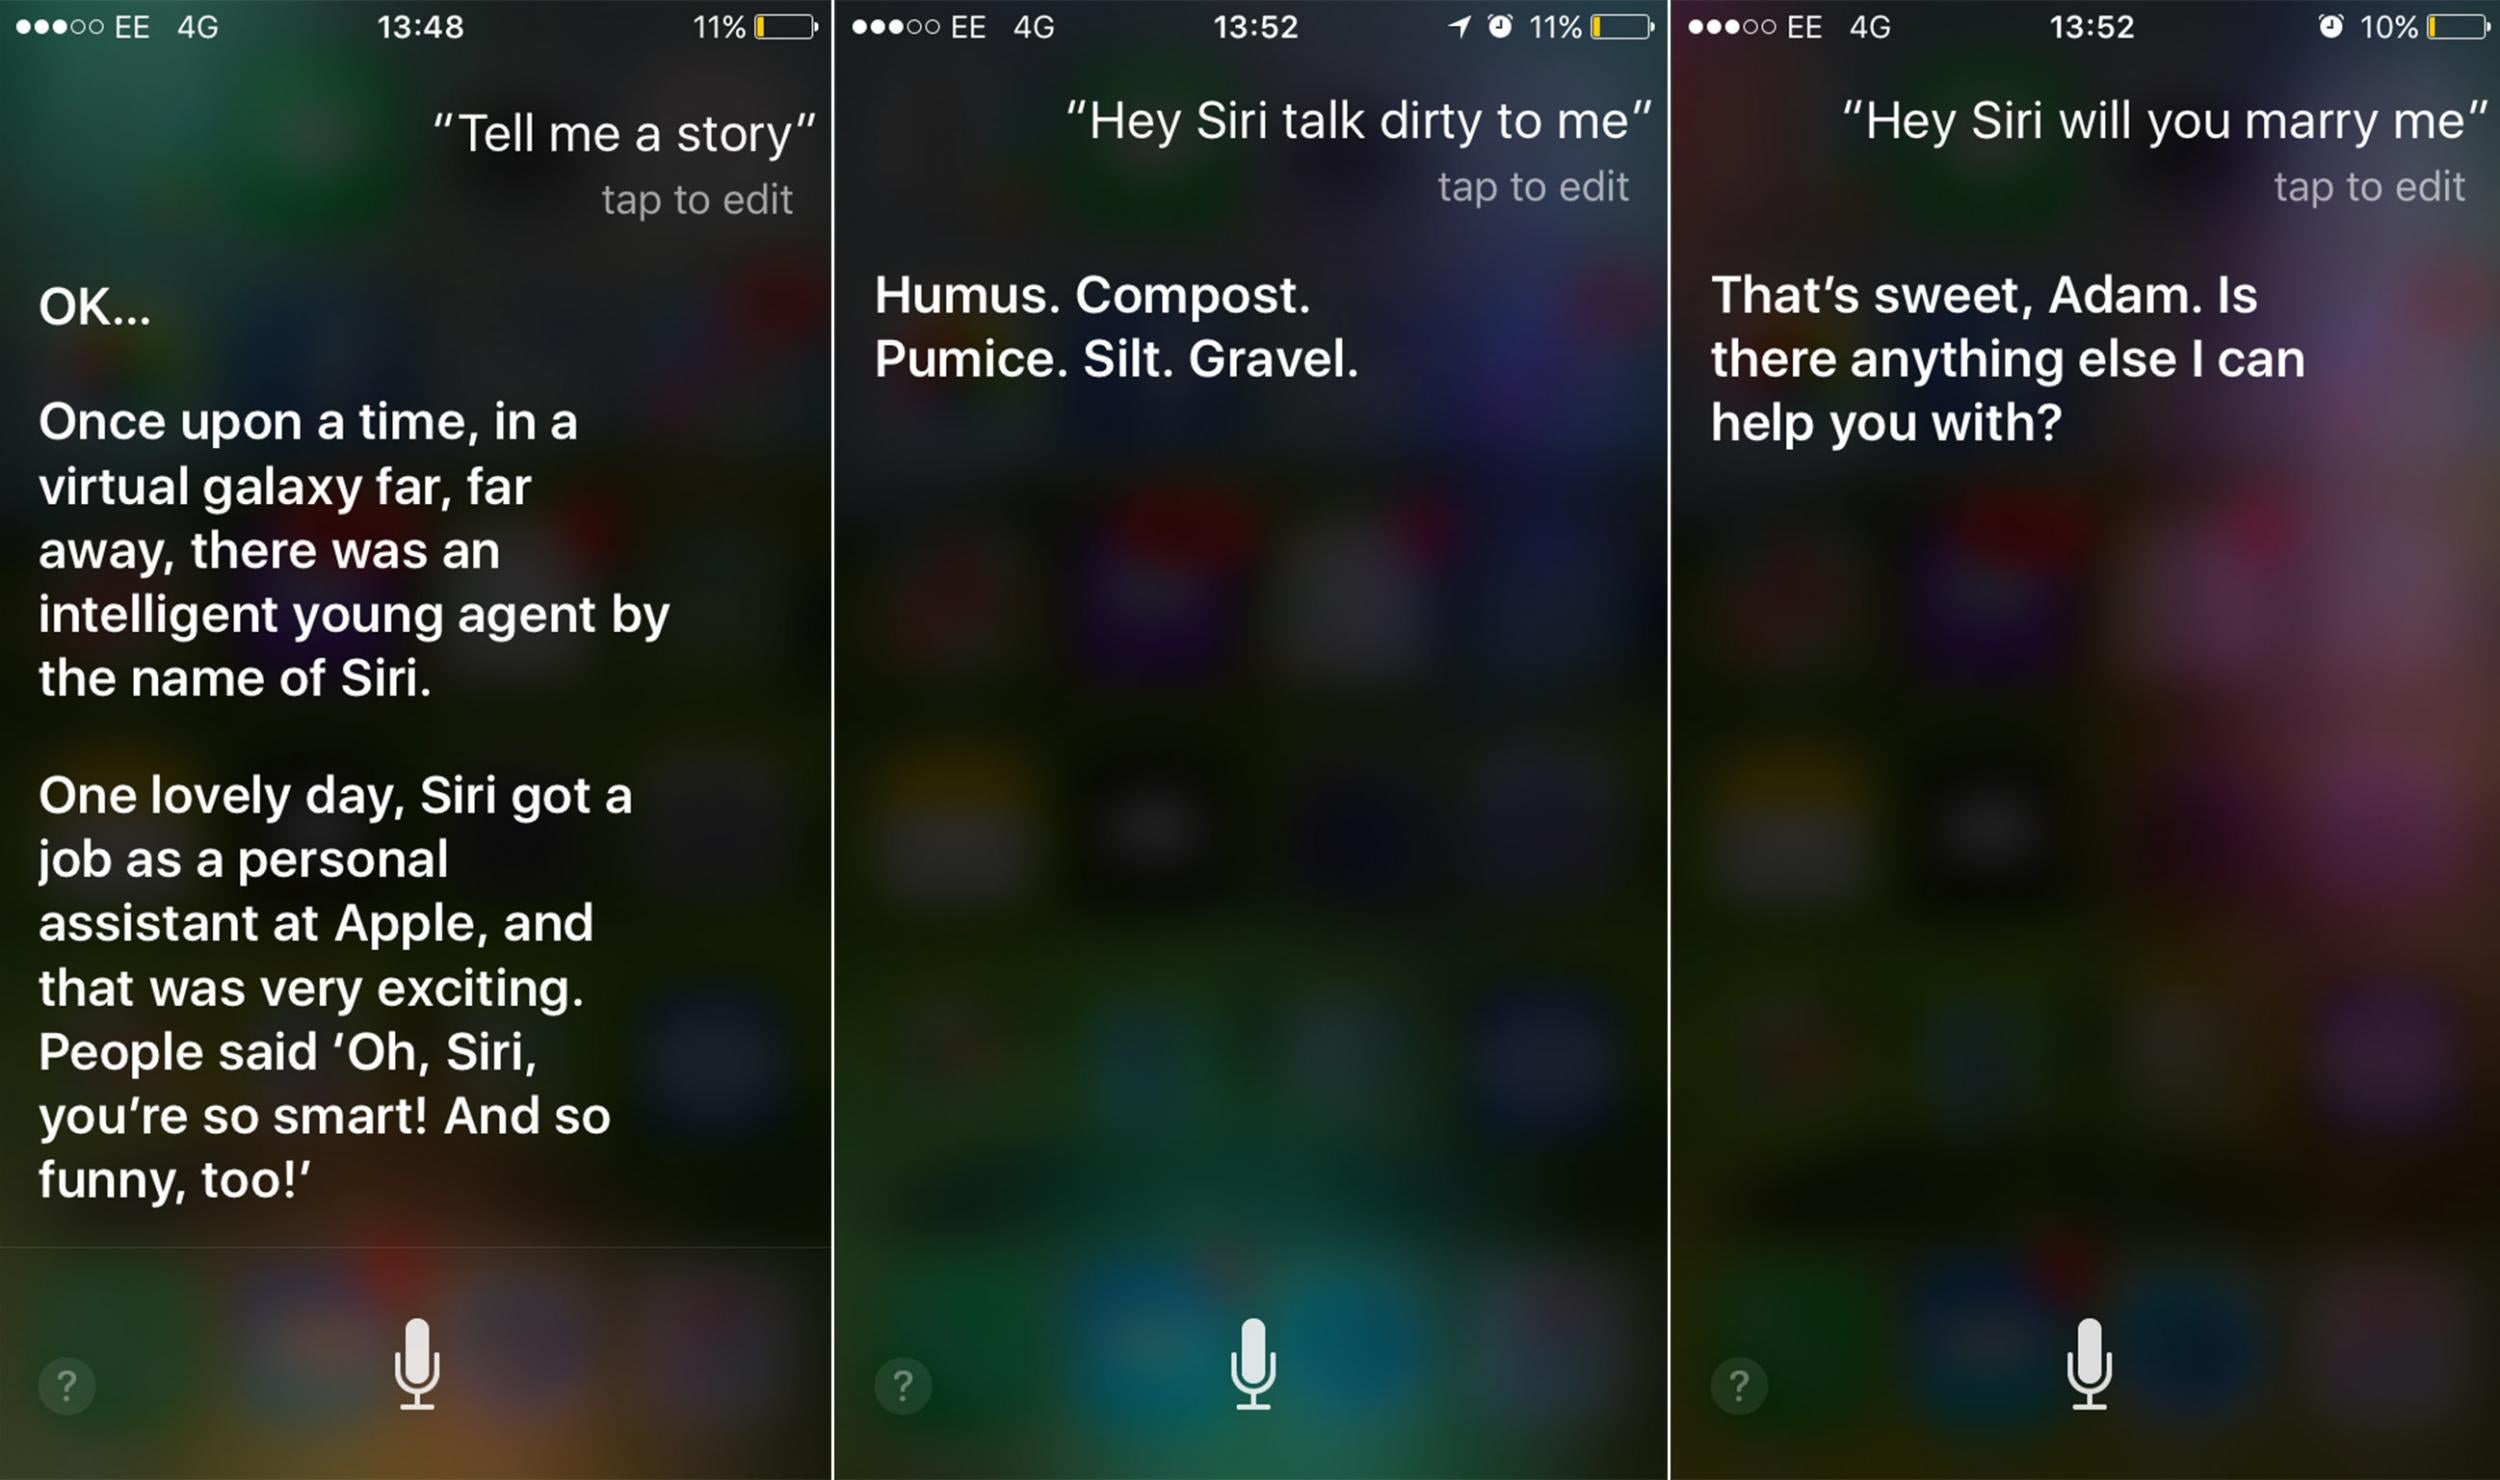 Siri's responses can be enigmatic